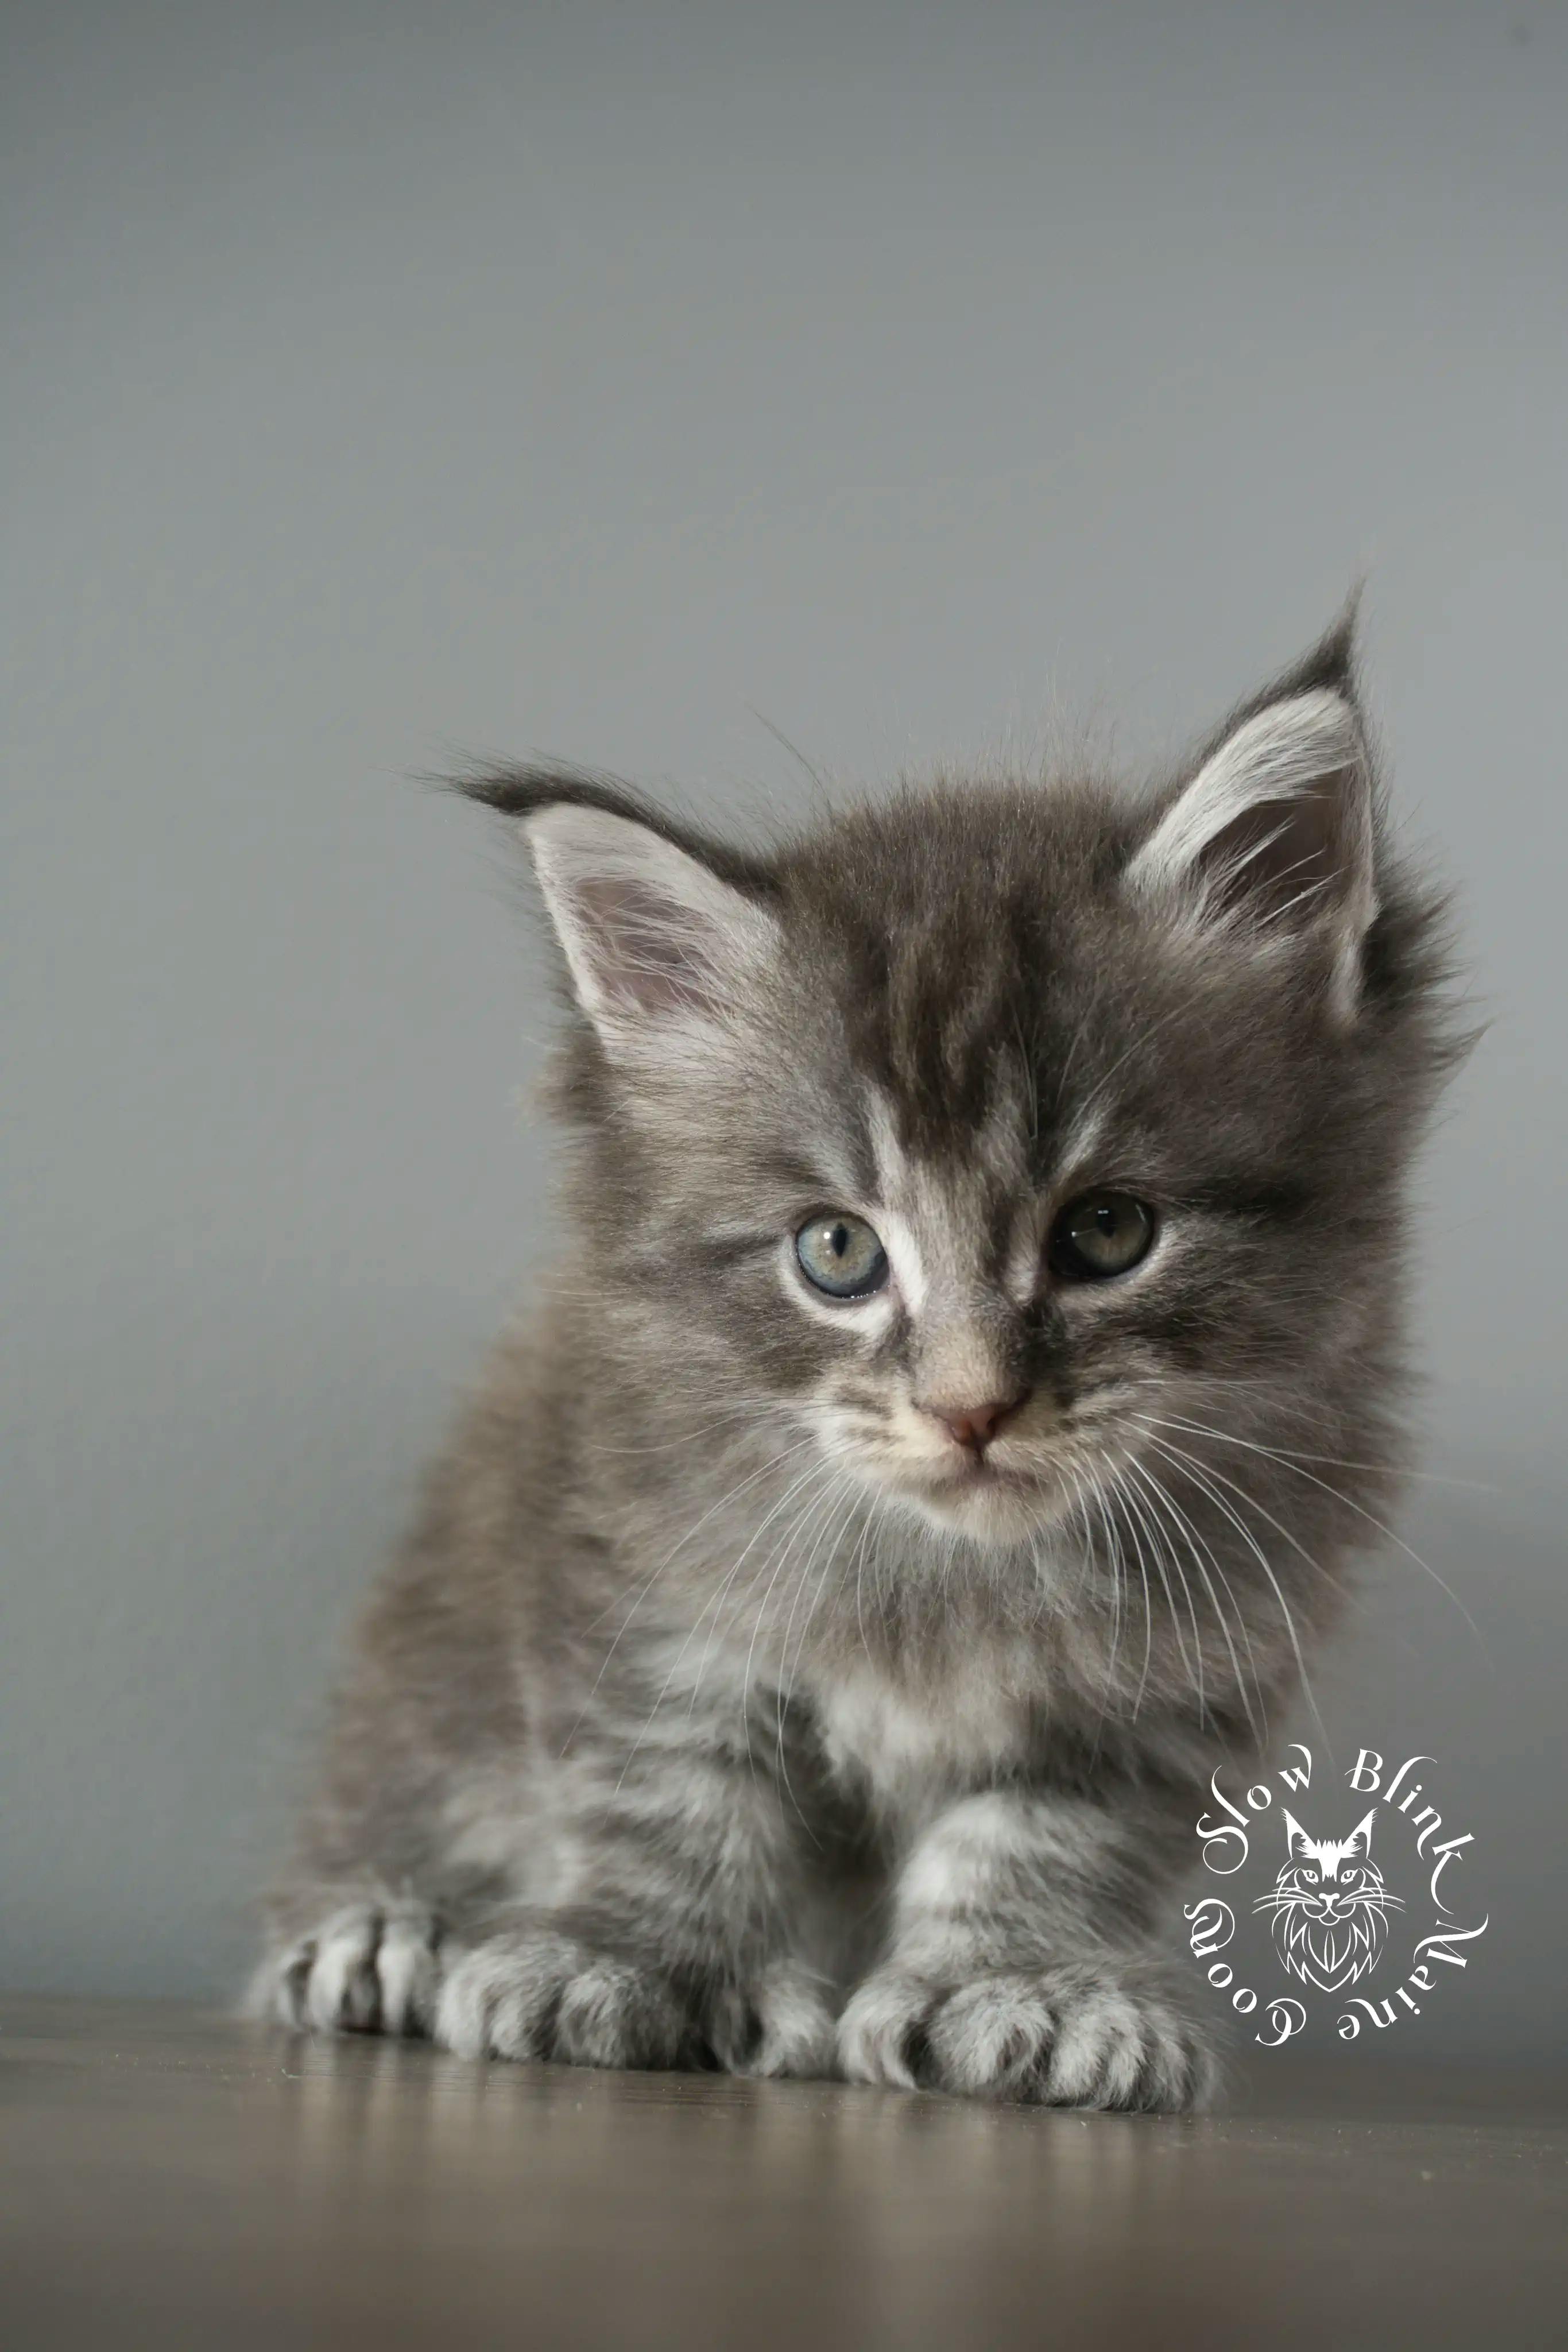 Blue Silver Tabby Maine Coon Kittens > blue silver tabby maine coon kitten | slowblinkmainecoons | 897